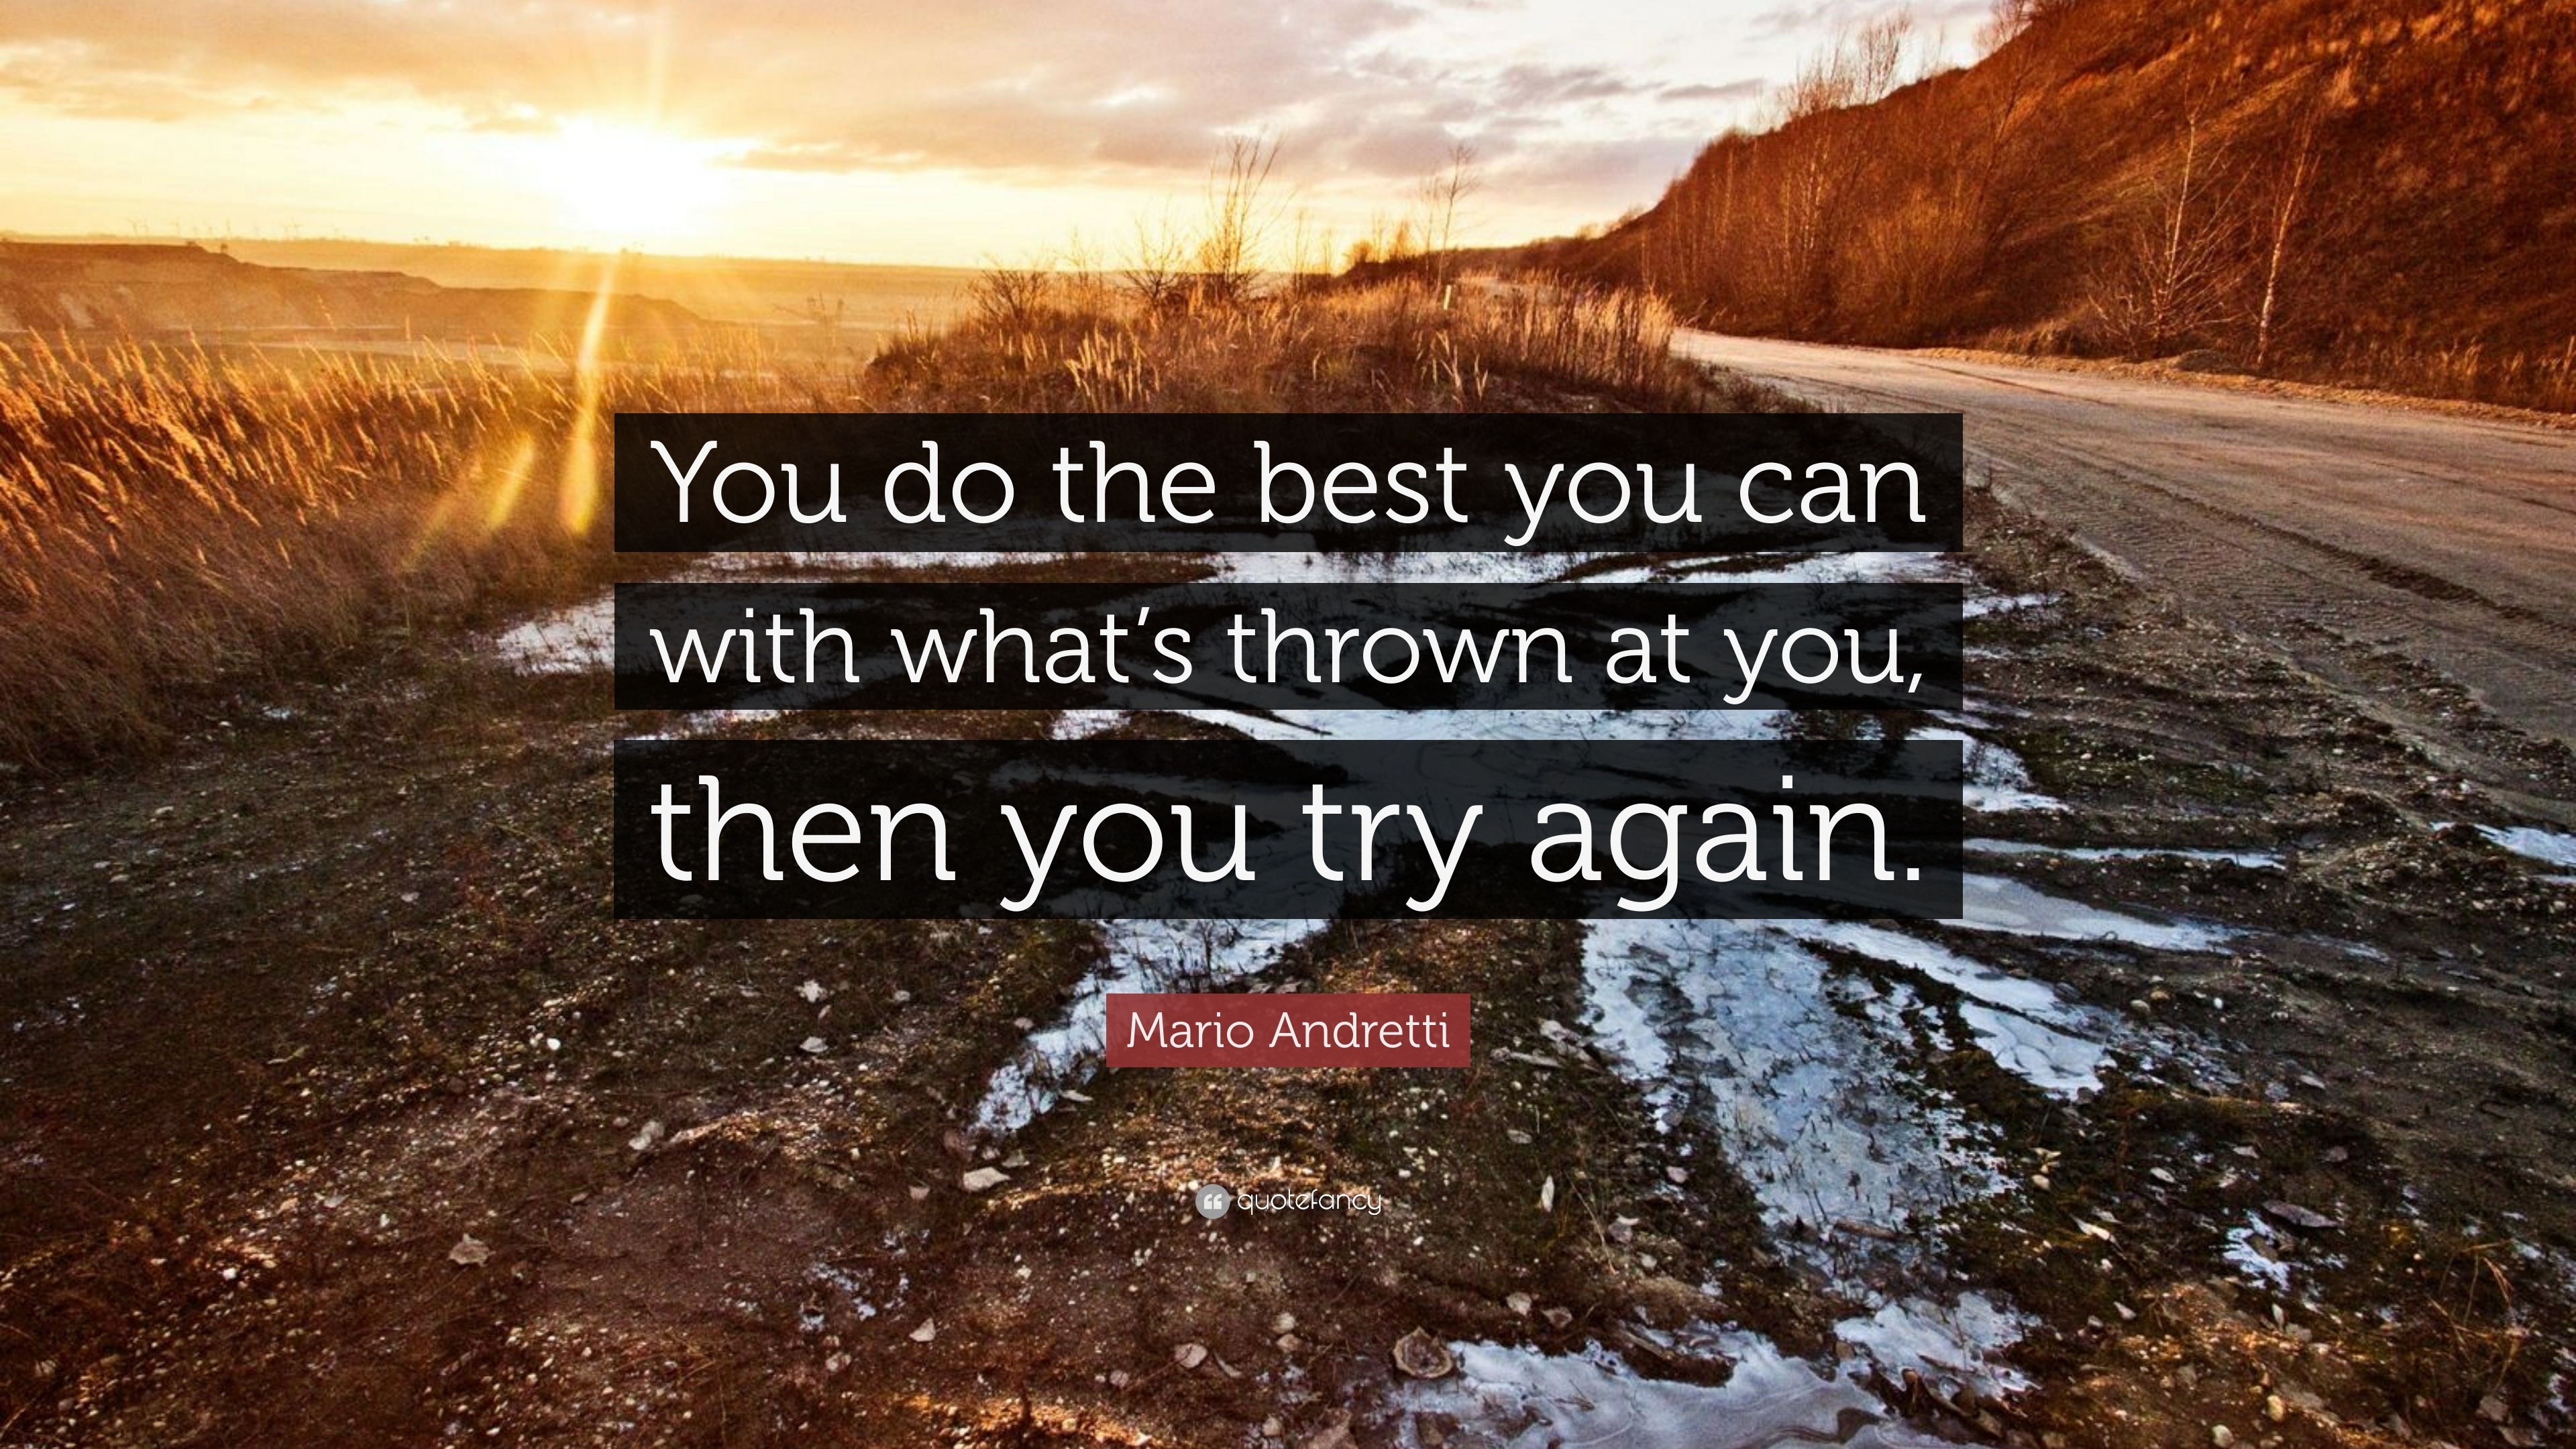 Mario Andretti Quote: “You do the best you can with what’s thrown at ...